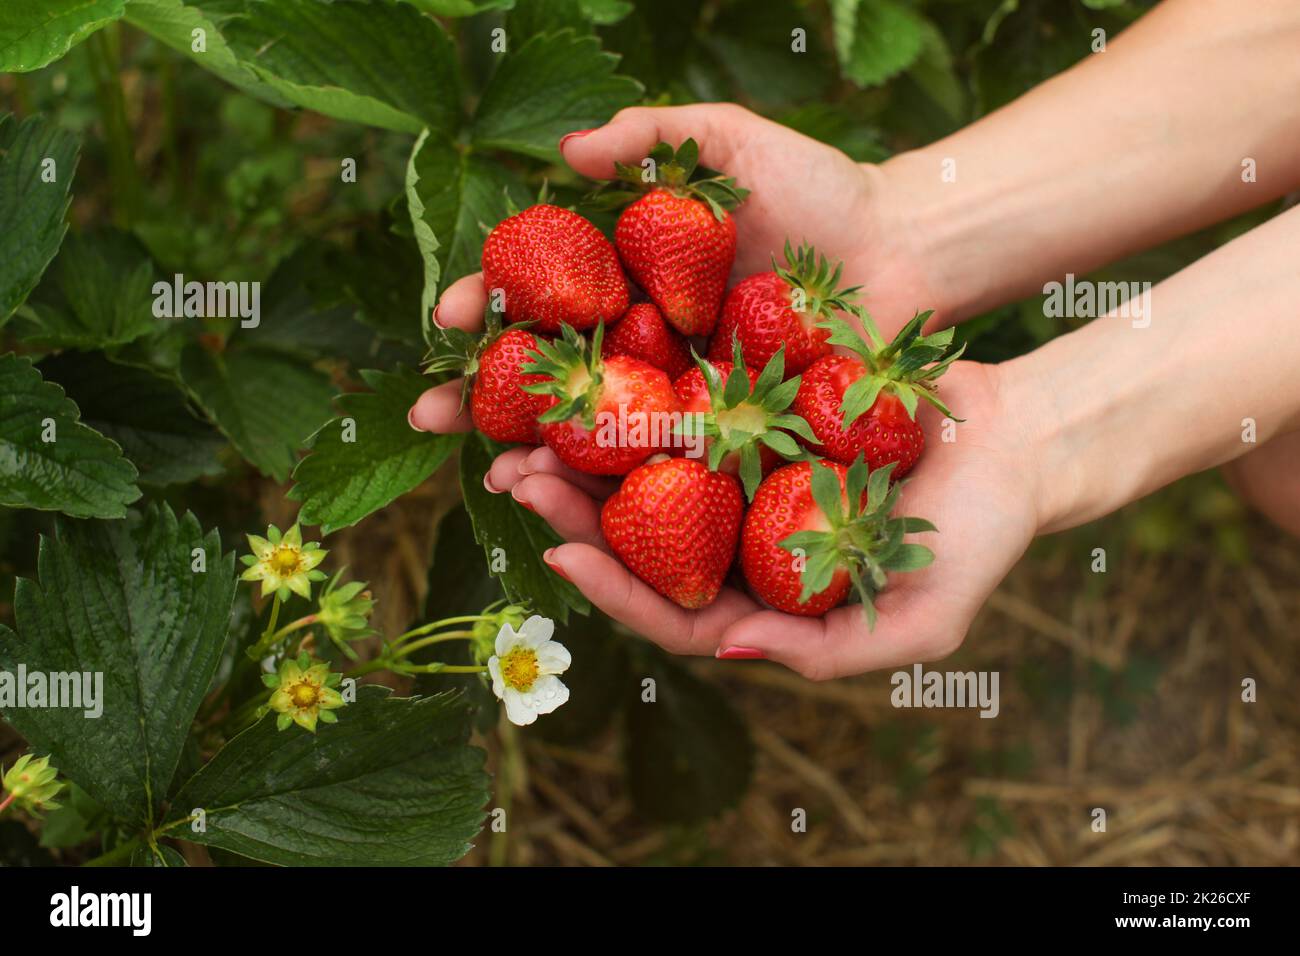 Woman hand holding handful of freshly picked strawberries, leaves and flowers in background. Self picking strawberry farm field. Stock Photo